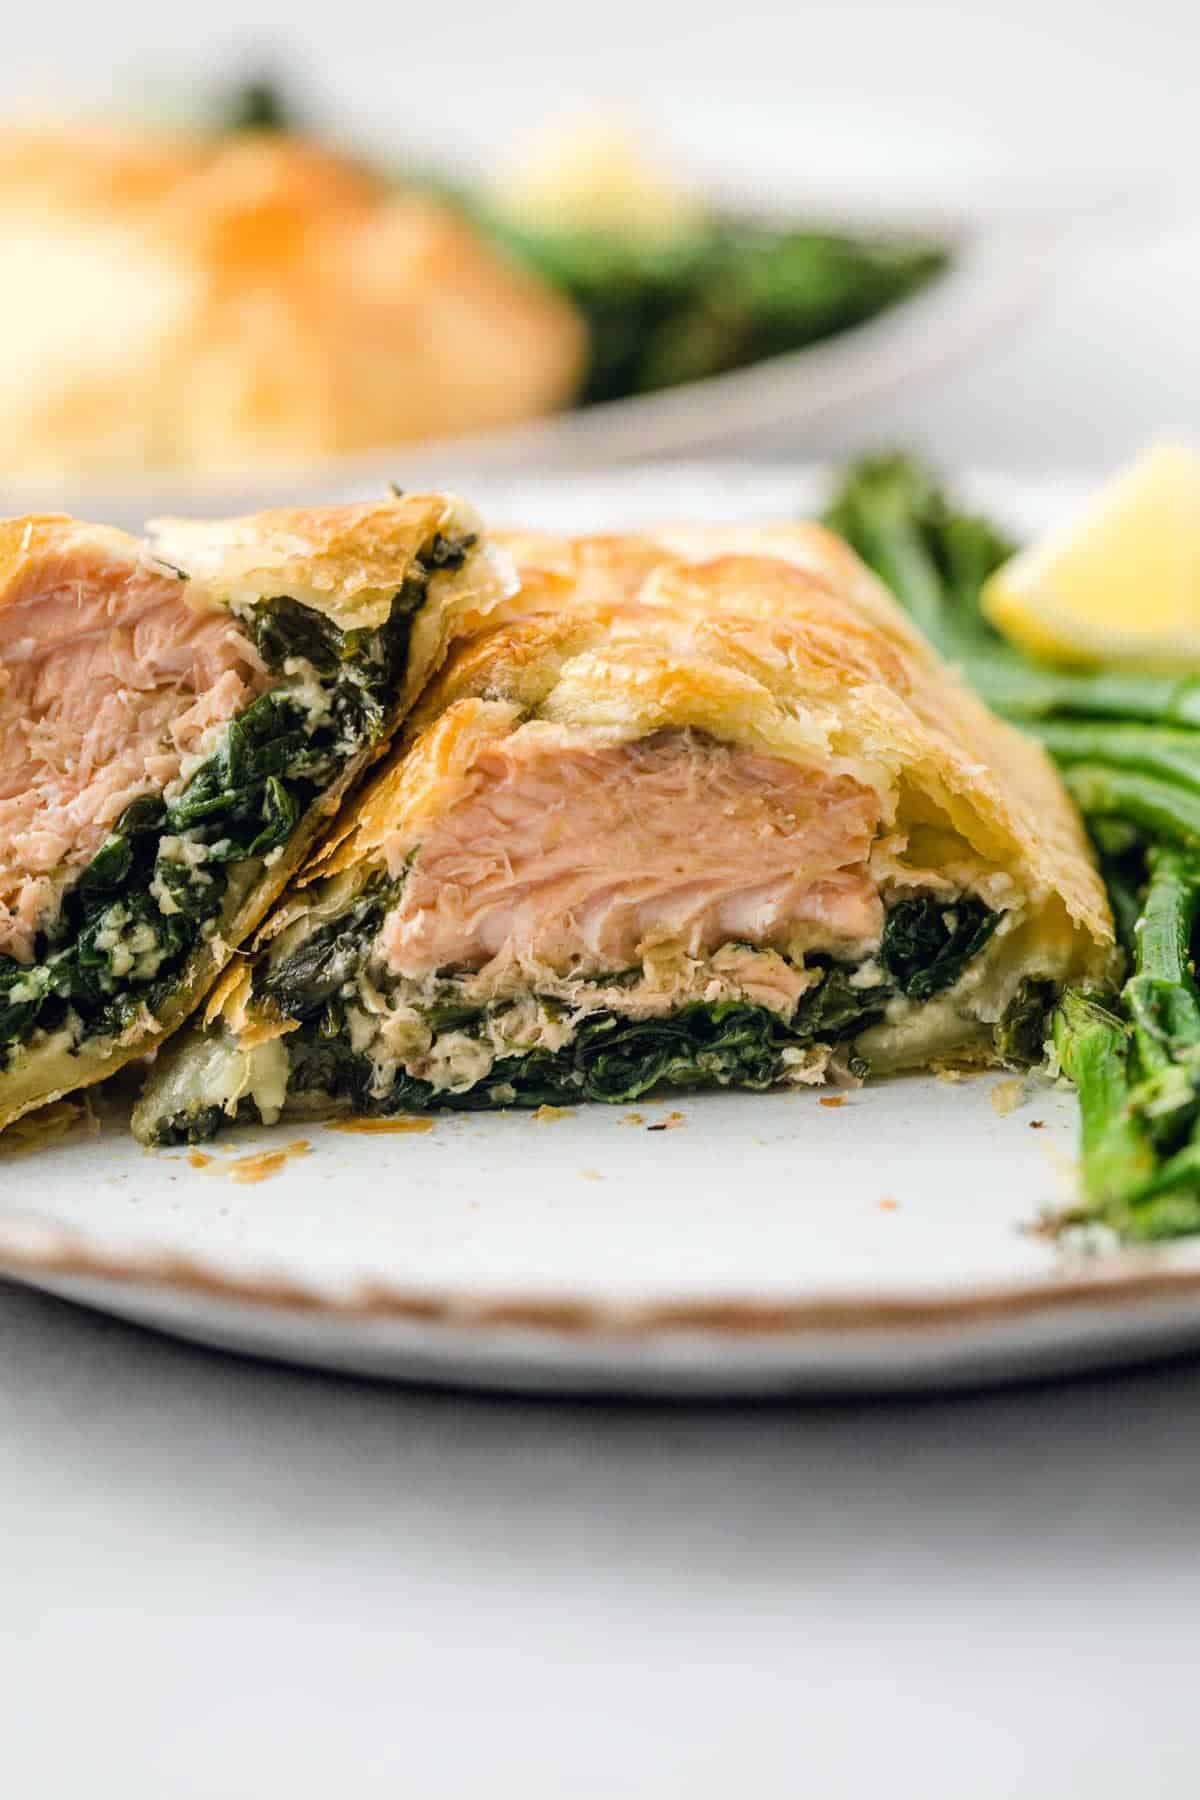 Cutting through the salmon wellington to see the perfect layering of the ingredients